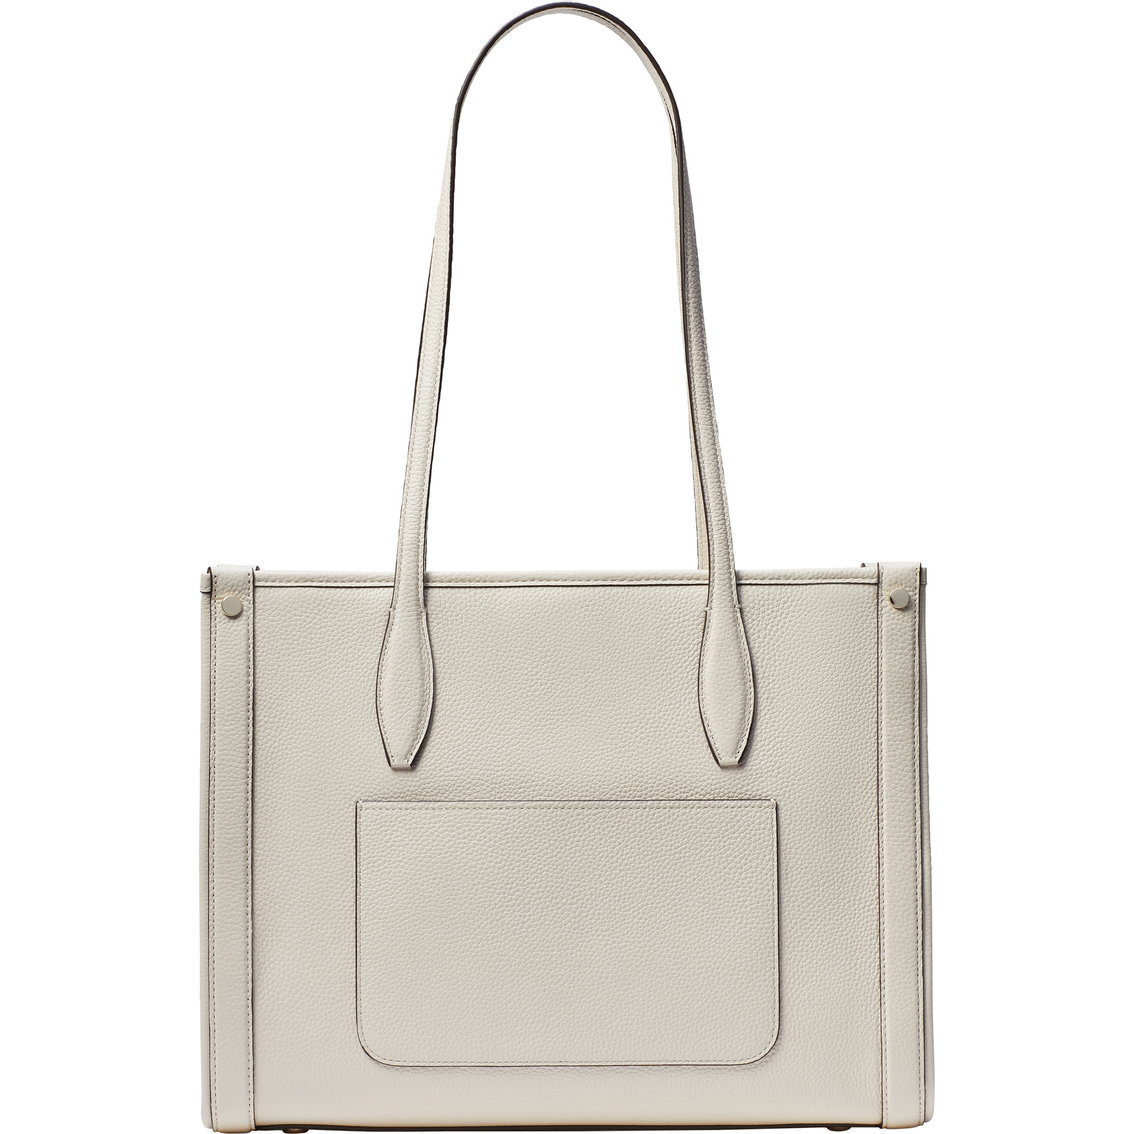 Kate Spade Market Pebbled Leather Medium Tote | Totes & Shoppers ...